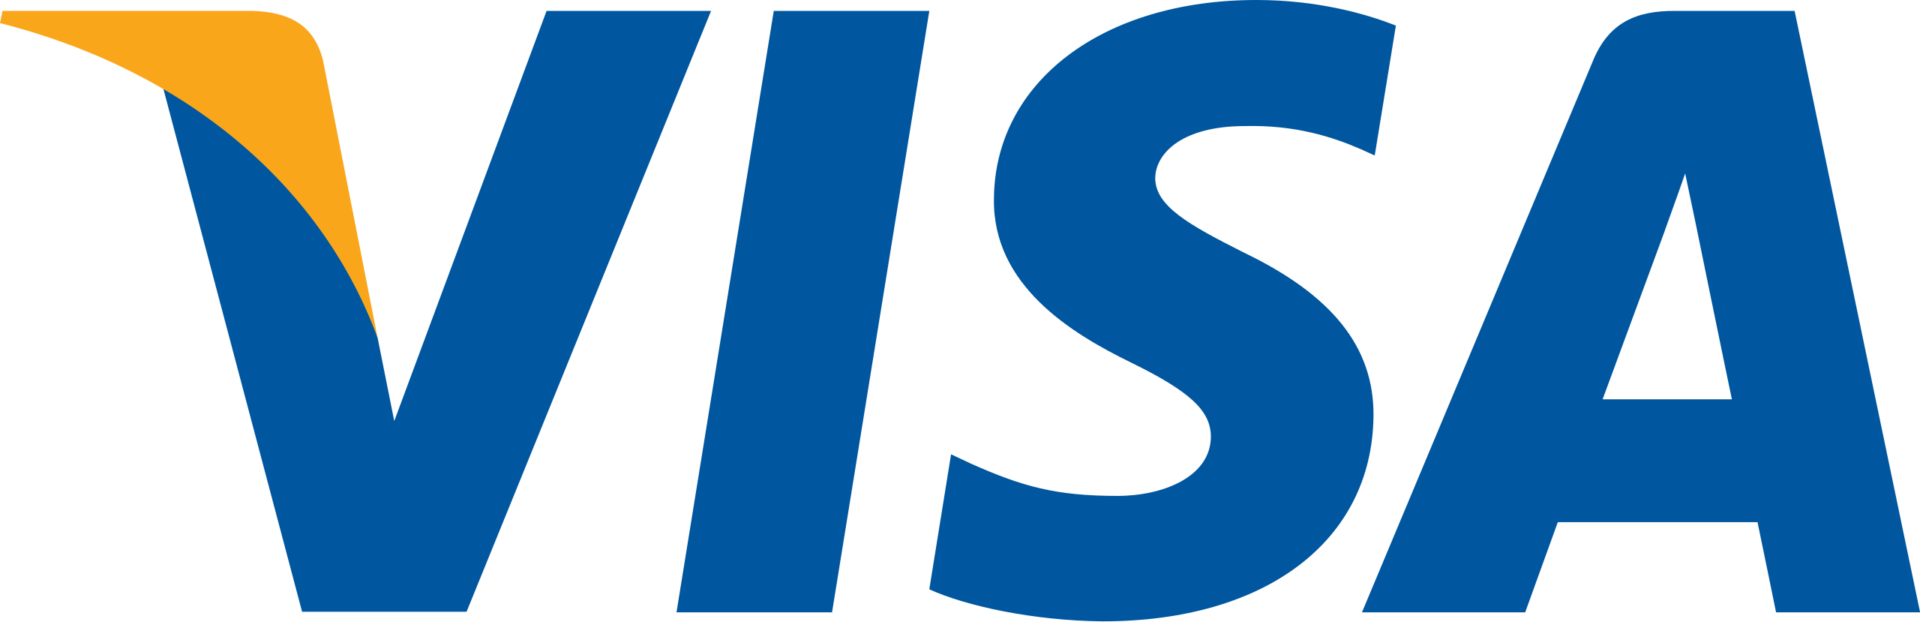 A blue and green logo for the visa.